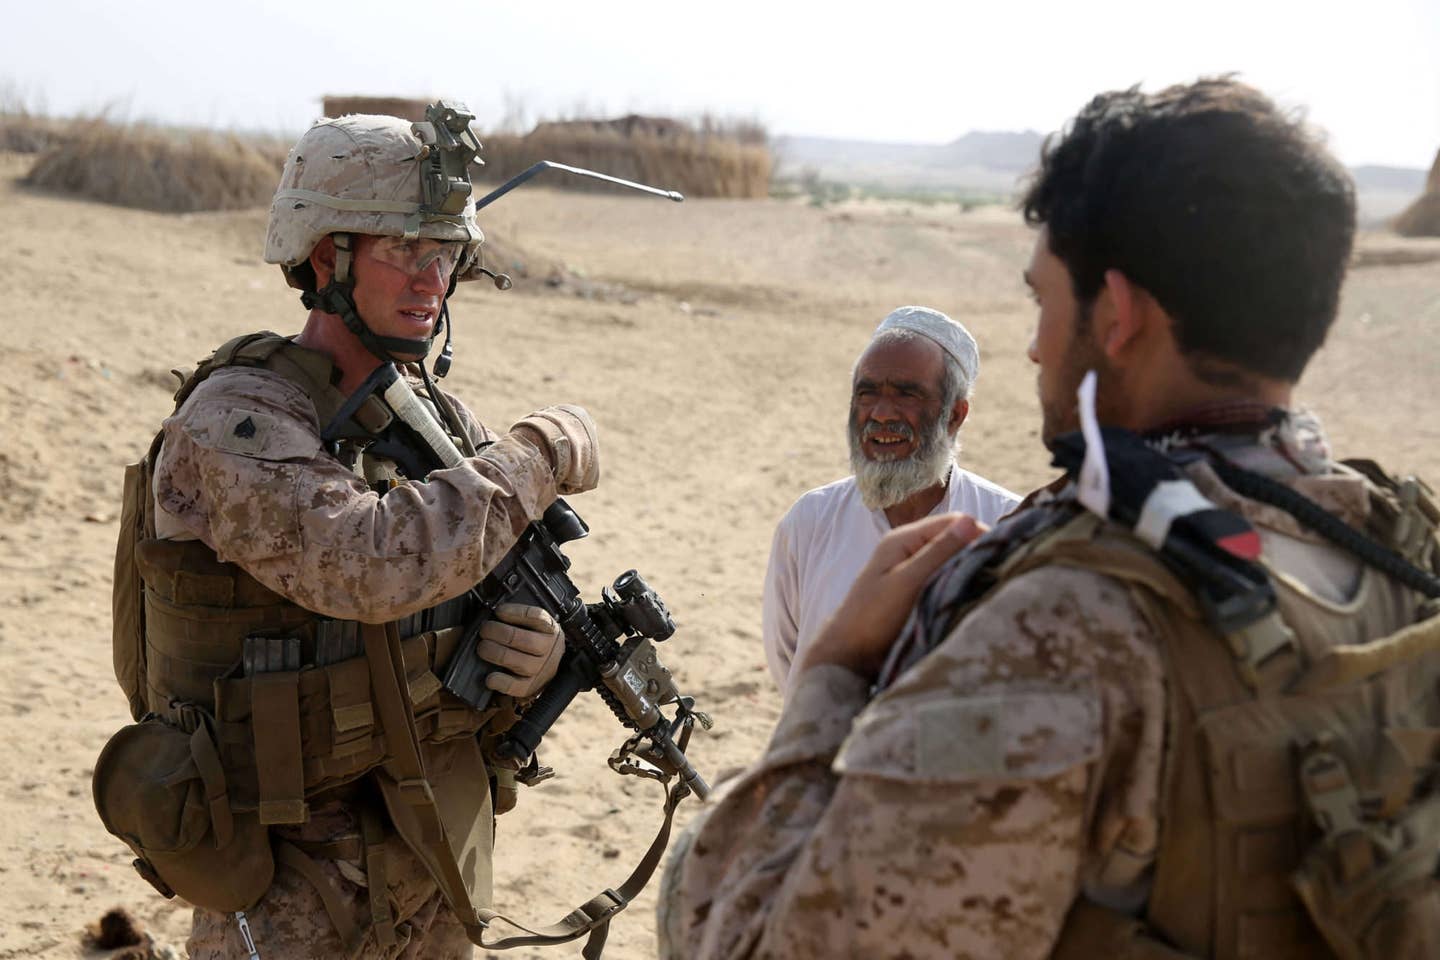 Sergeant Warren Sparks, squad leader, Bravo Company, 1st Battalion, 7th Marine Regiment, and a native of Baton Rouge, Louisiana, is assisted by an interpreter to gather intelligence from a local Afghan during a mission in Helmand province, Afghanistan, May 1, 2014. (U.S. military photo)